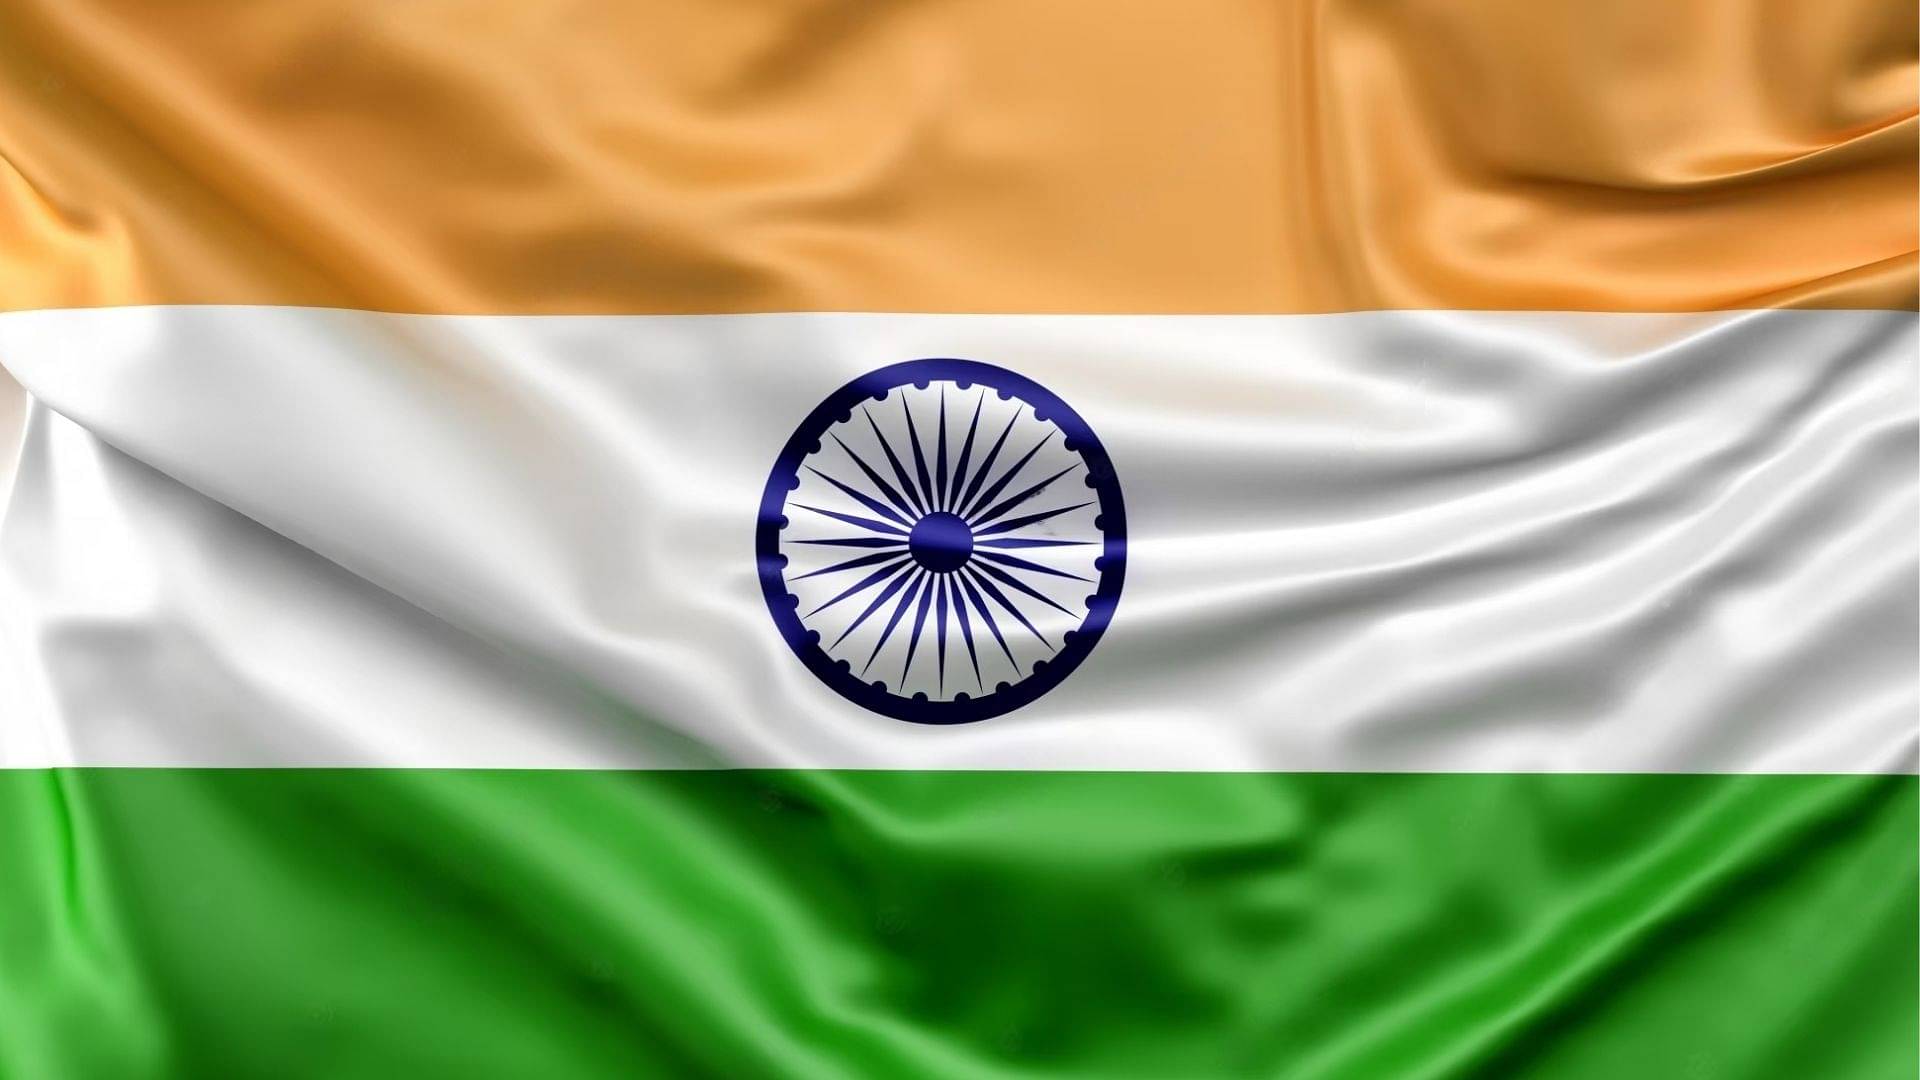 An illustration of the Indian flag